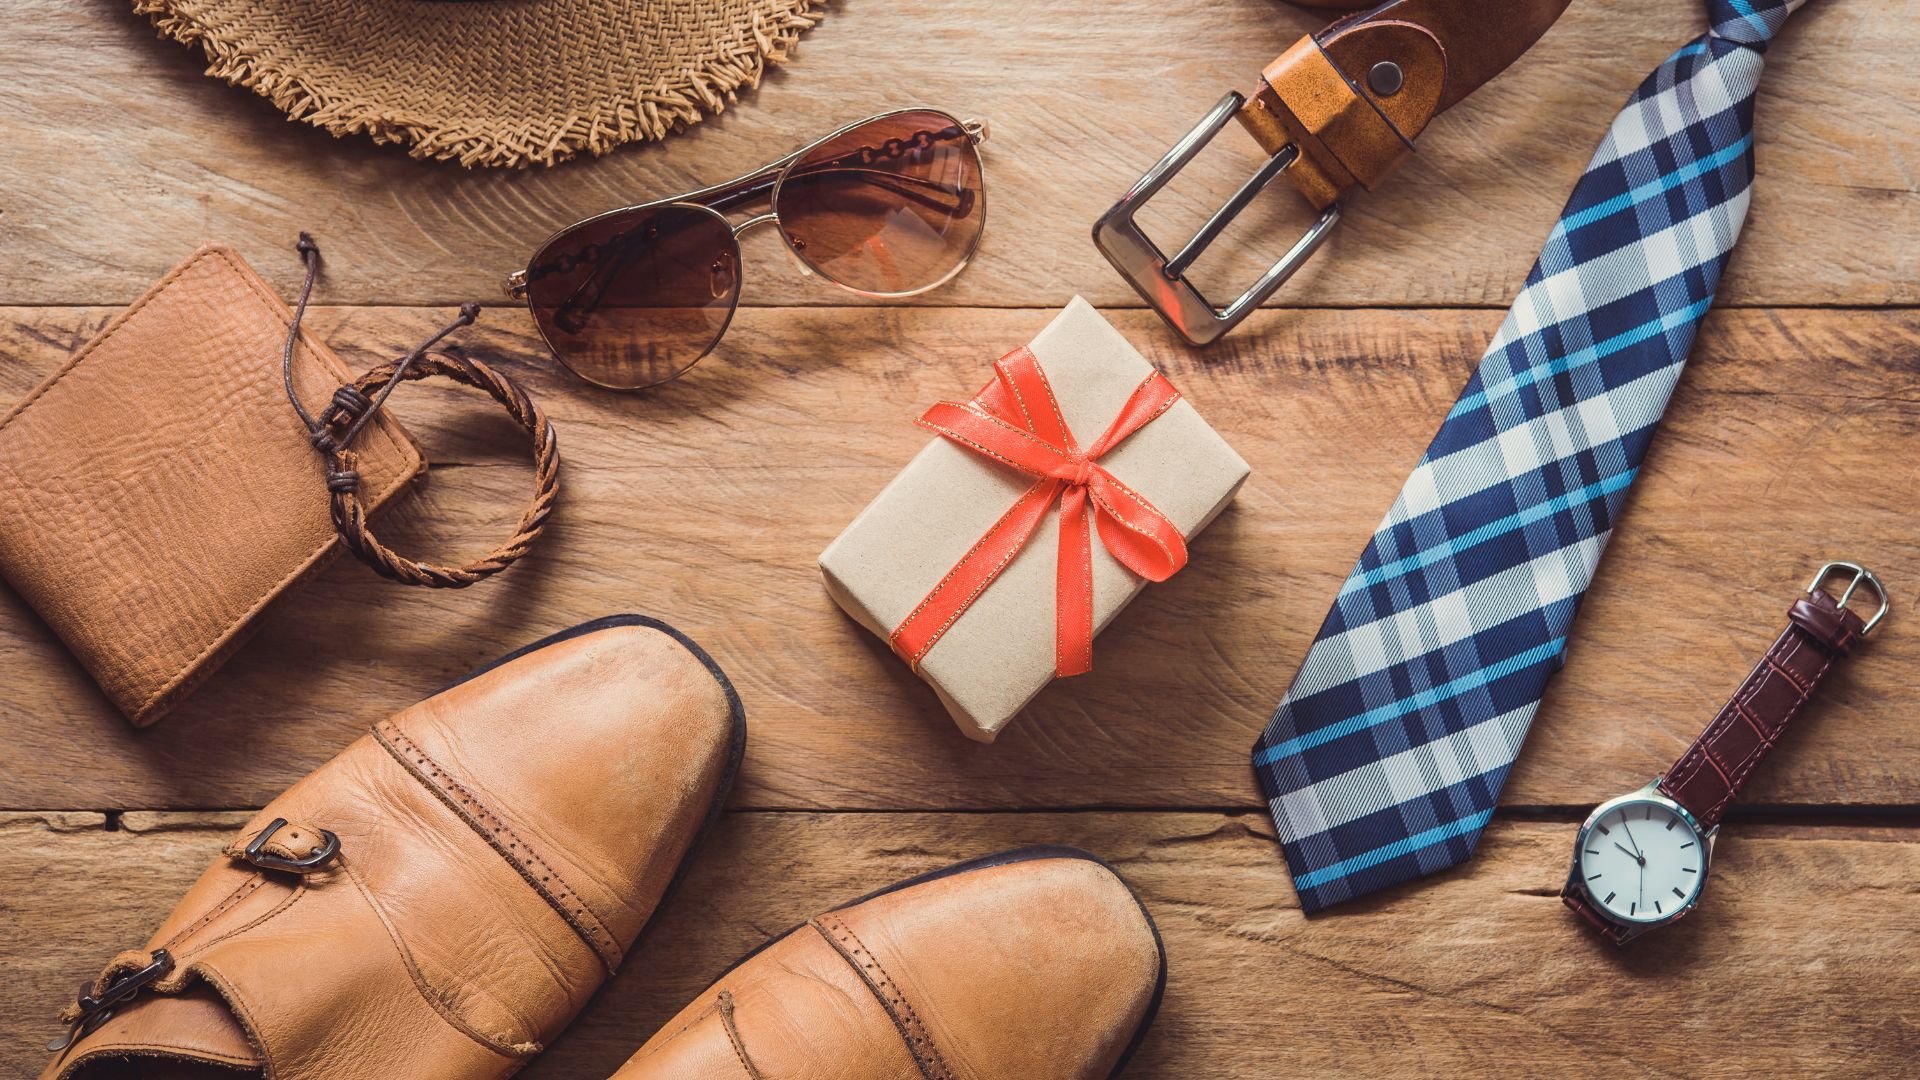 10 Thoughtful Father's Day Gift Ideas for Dad